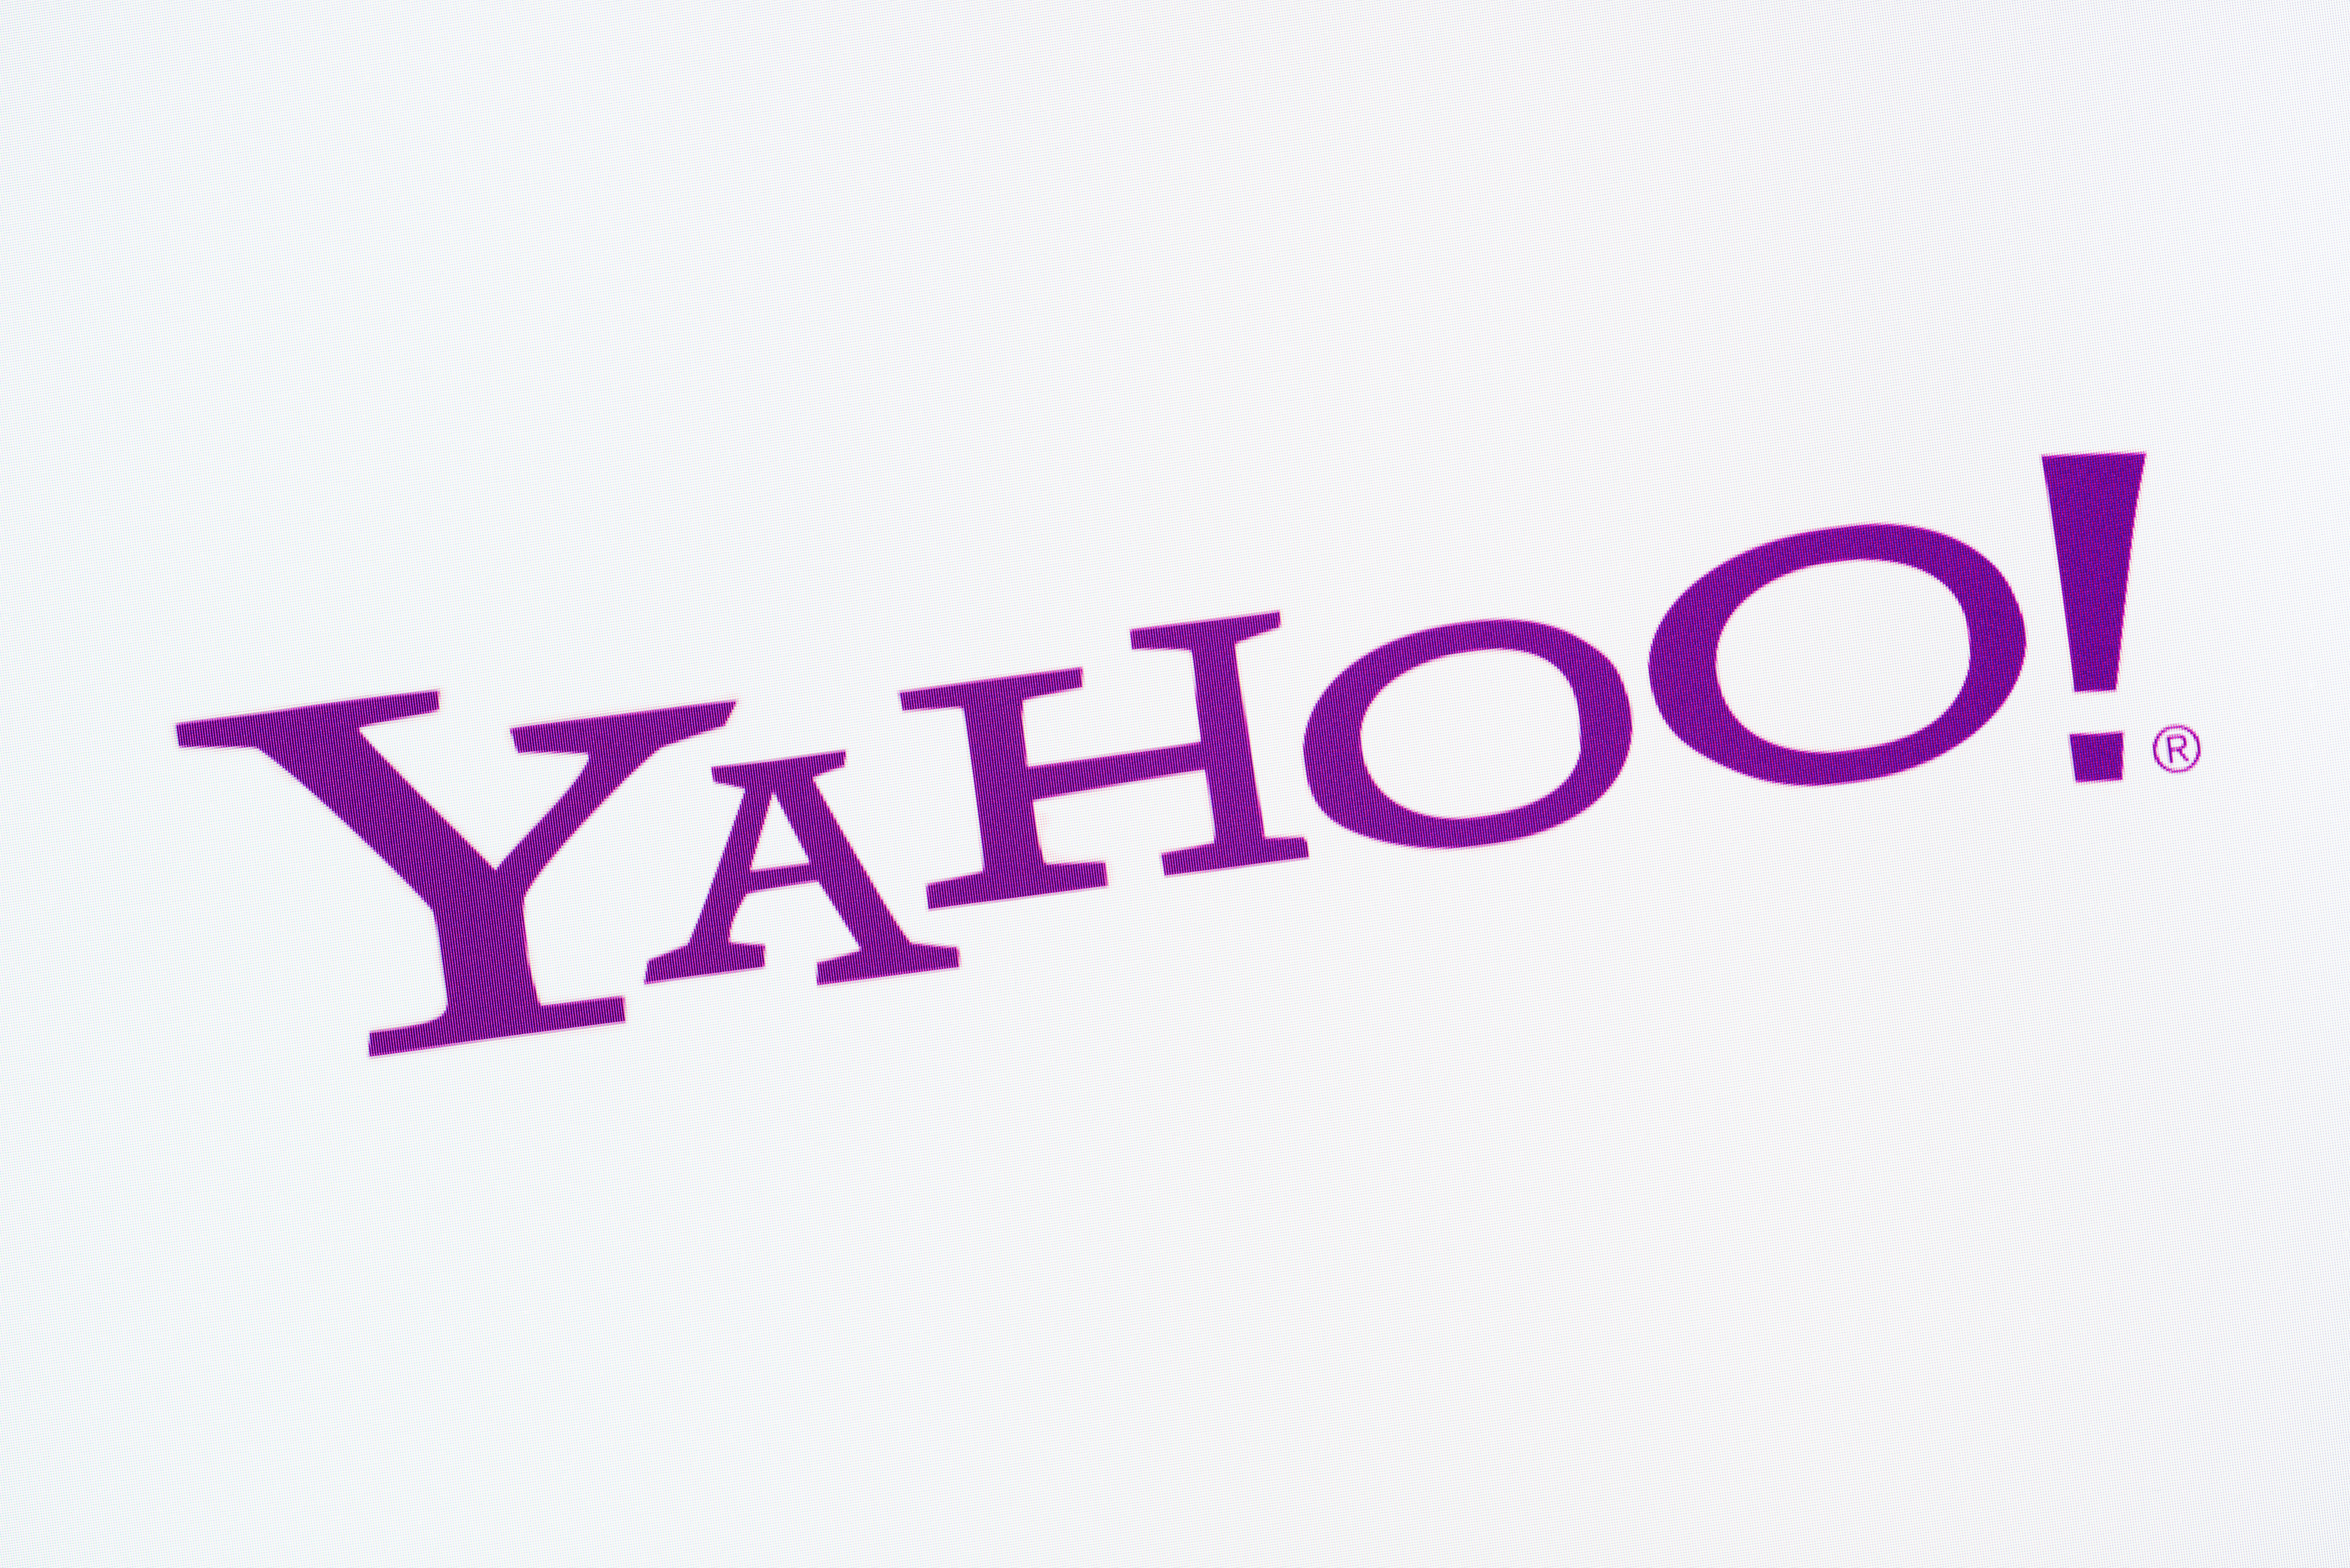 From Dark Reading – 10 Years After Yahoo Breach, What’s Changed? (Not Much)